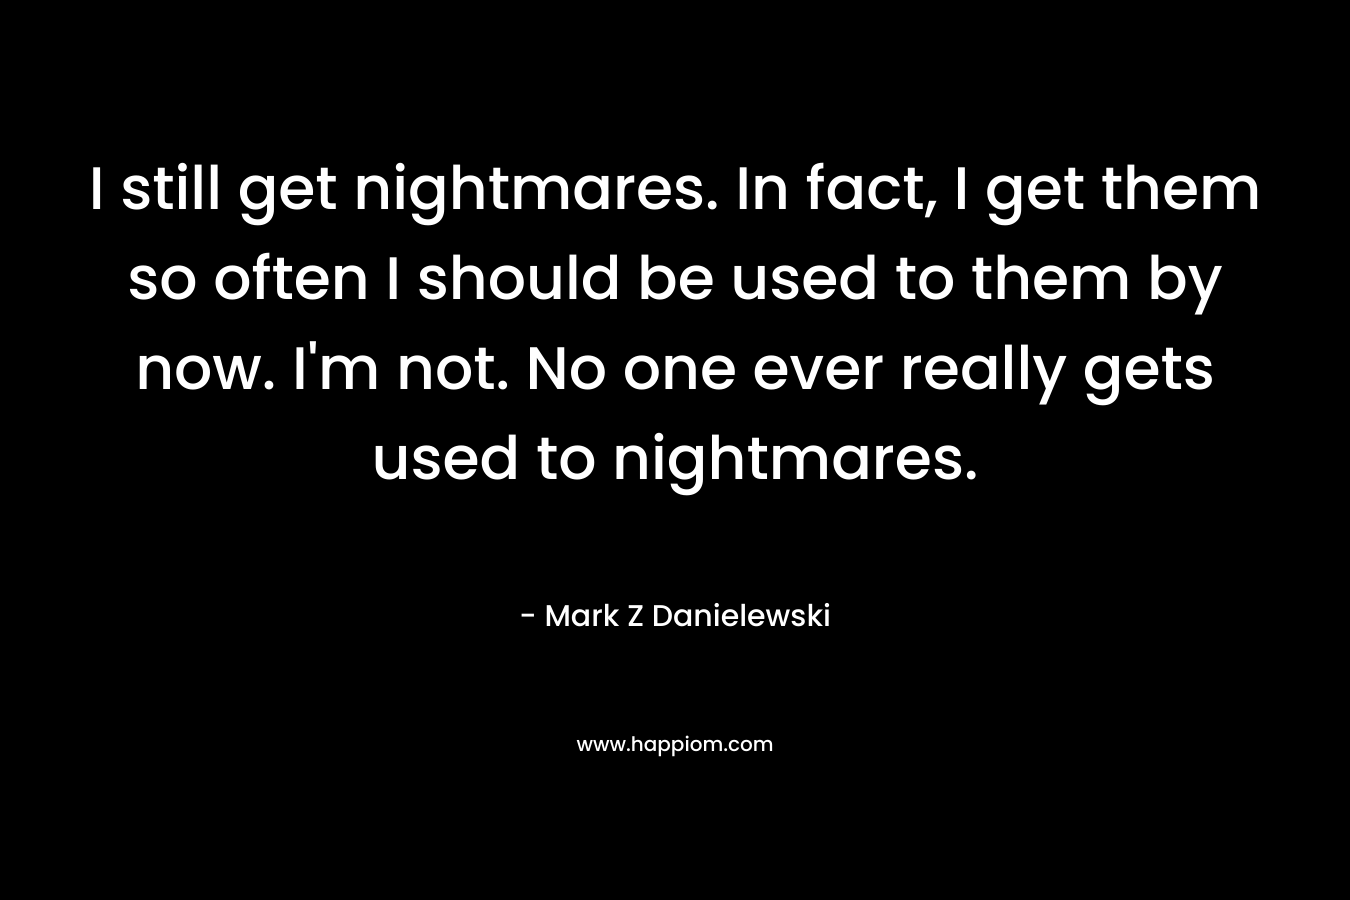 I still get nightmares. In fact, I get them so often I should be used to them by now. I’m not. No one ever really gets used to nightmares. – Mark Z Danielewski